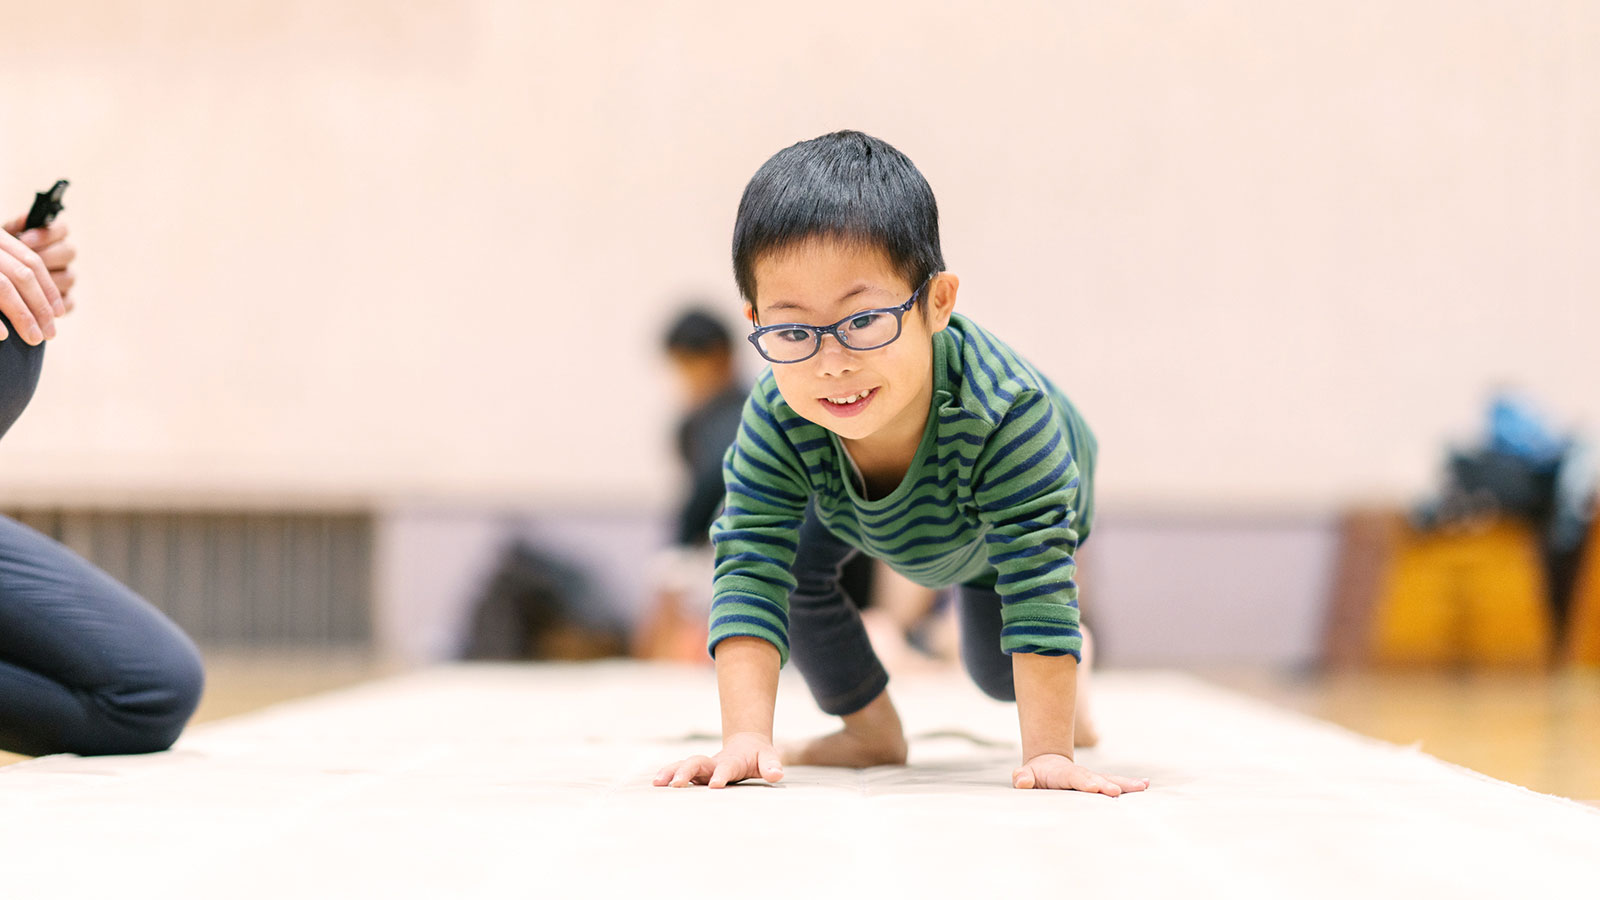 An elementary school-aged boy with dark hair and glasses is crawling toward the camera on a white gym mat.